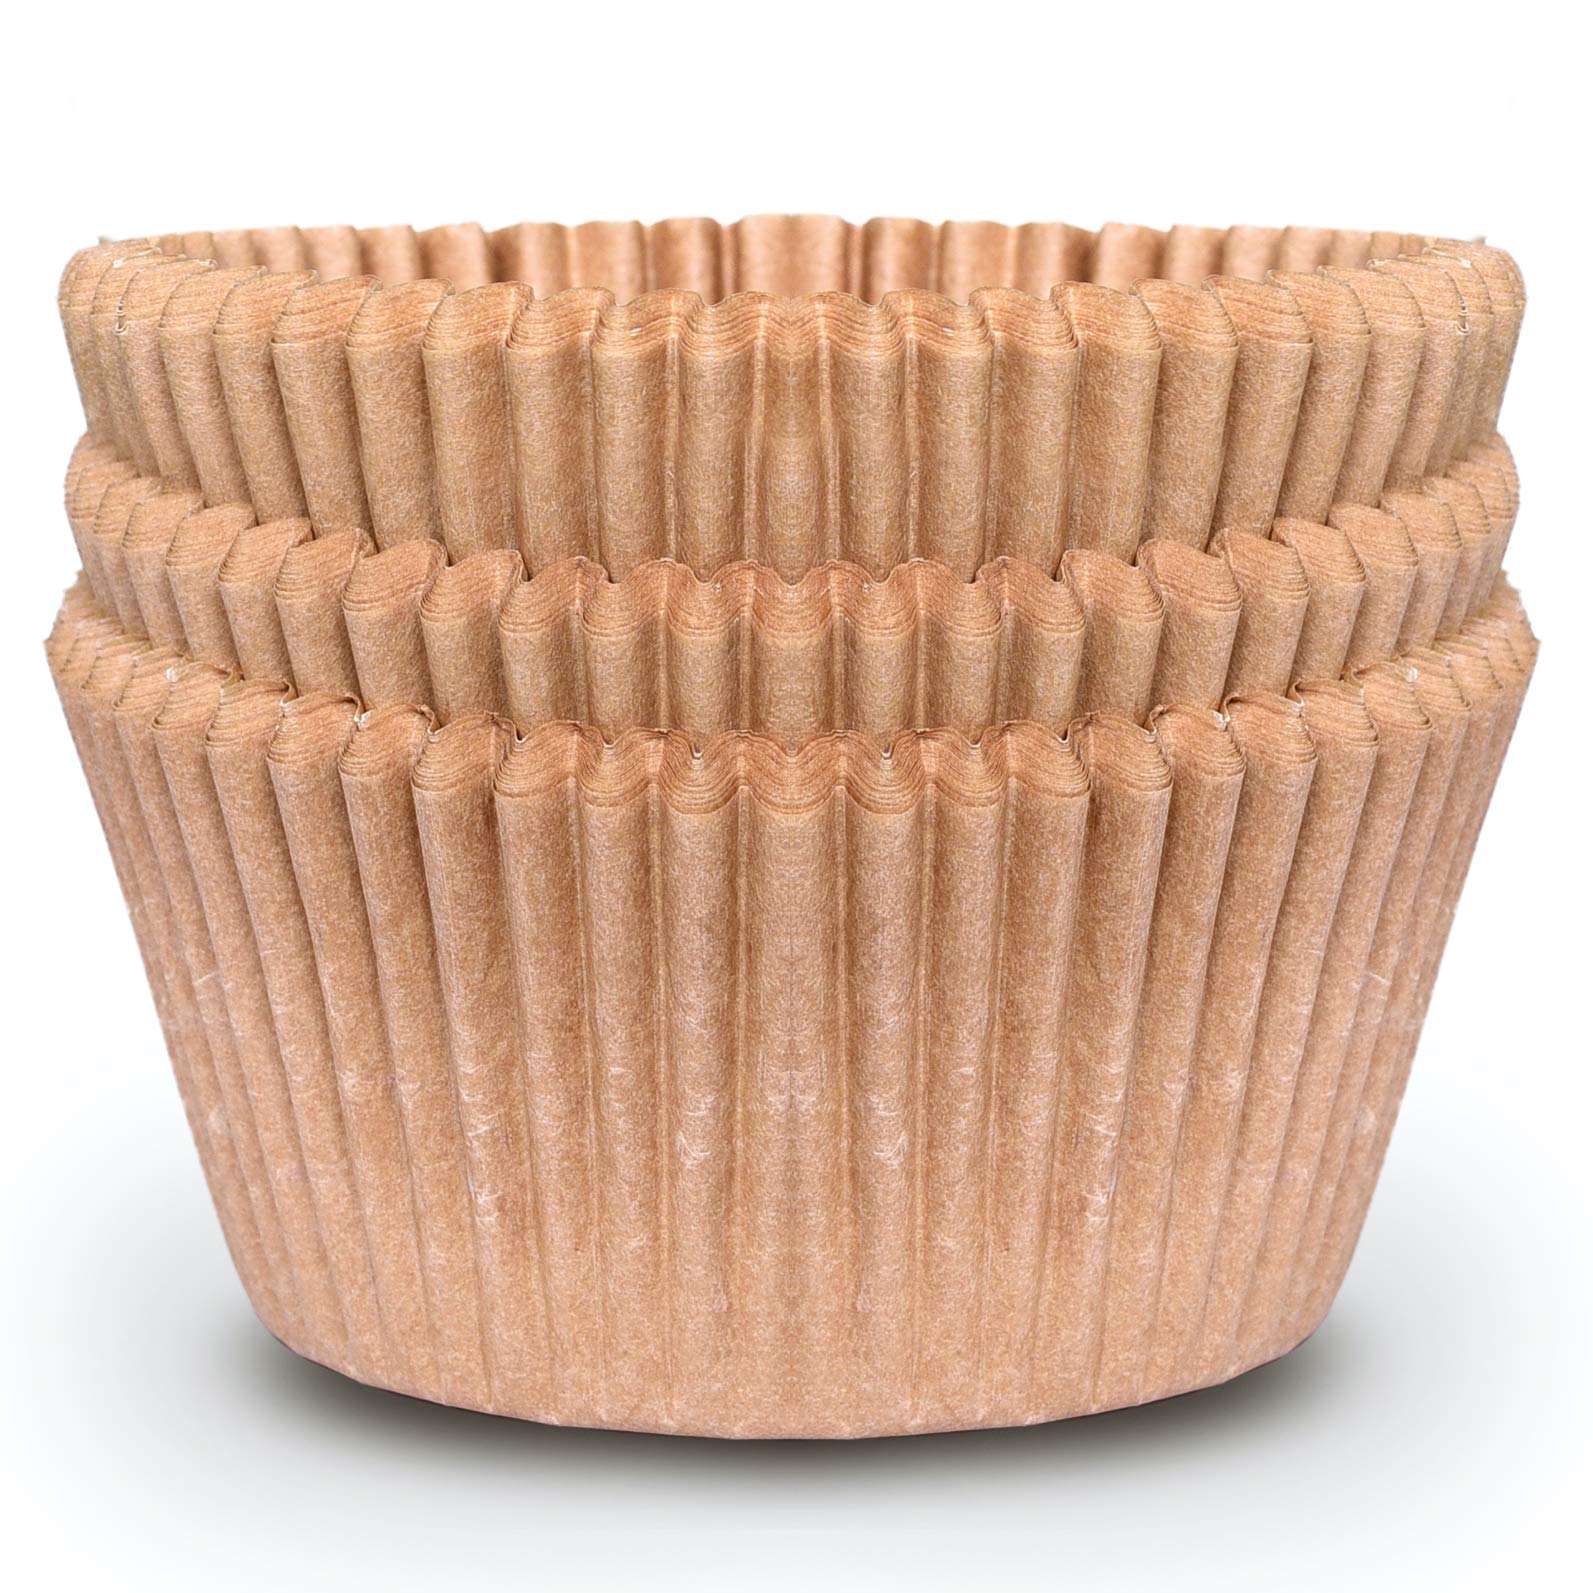 Cupcake Baking Cup Liner – Jumbo size, Extra Thick, Unbleached Brown Disposable Cup Parchment Liner for Baking– Food Grade & No Smell – Muffin Paper